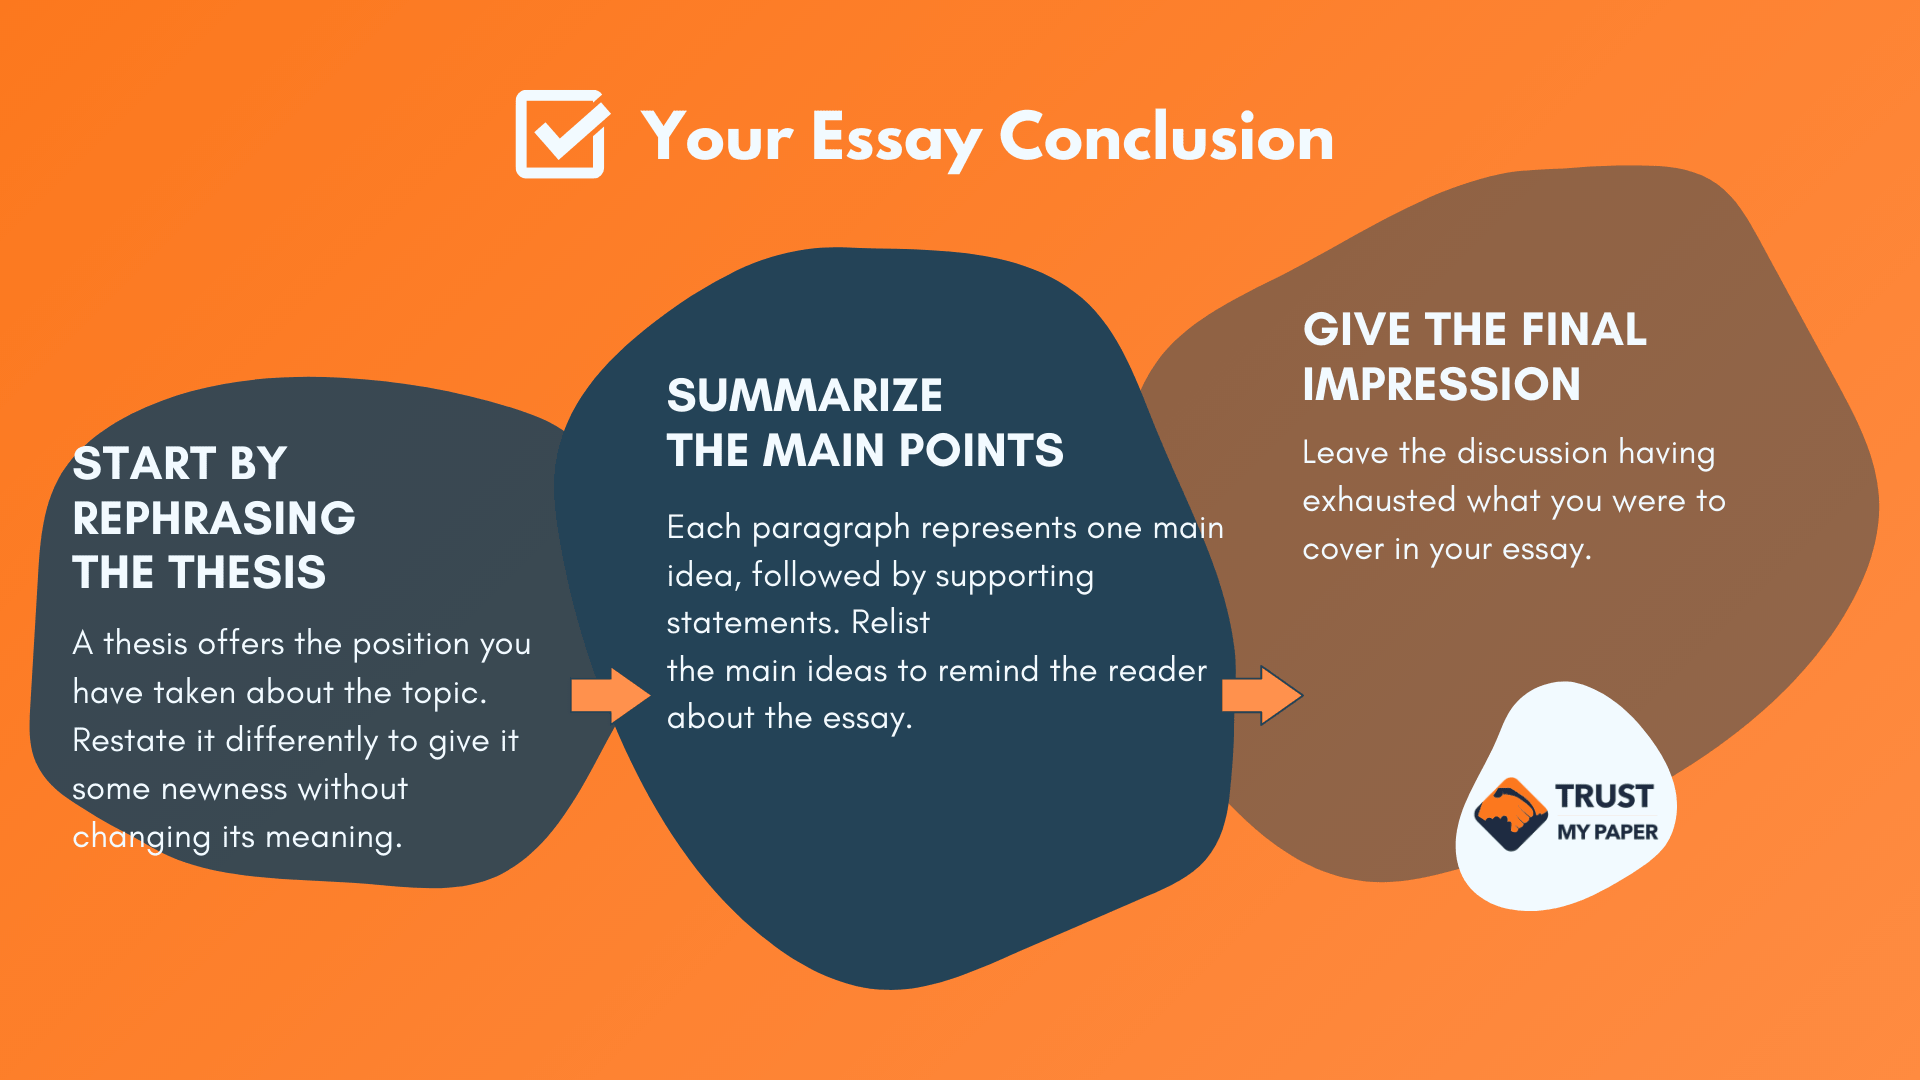 what is the purpose of an essay's conclusion